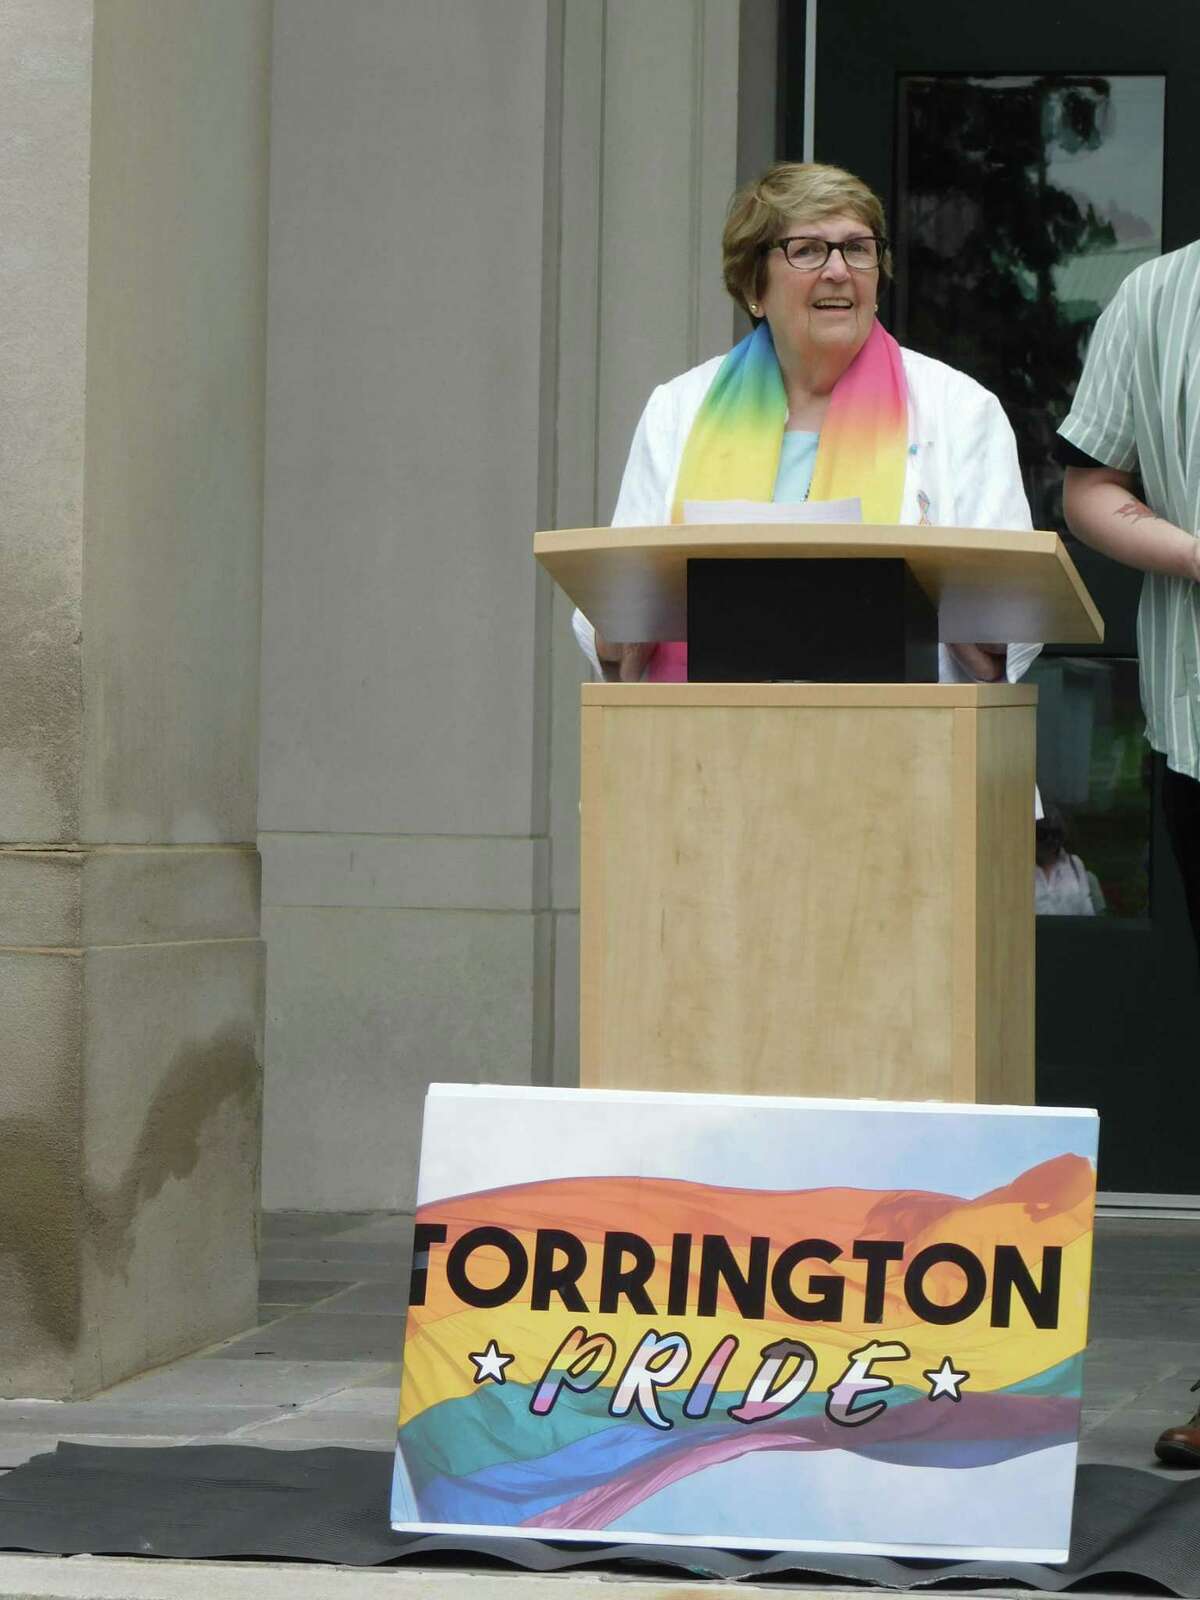 More than 50 people gathered June 2 in front of City Hall as the Pride flag representing the LGBTQ community was raised here for the first time. Here, former City Councilwoman Sharon Waagner.